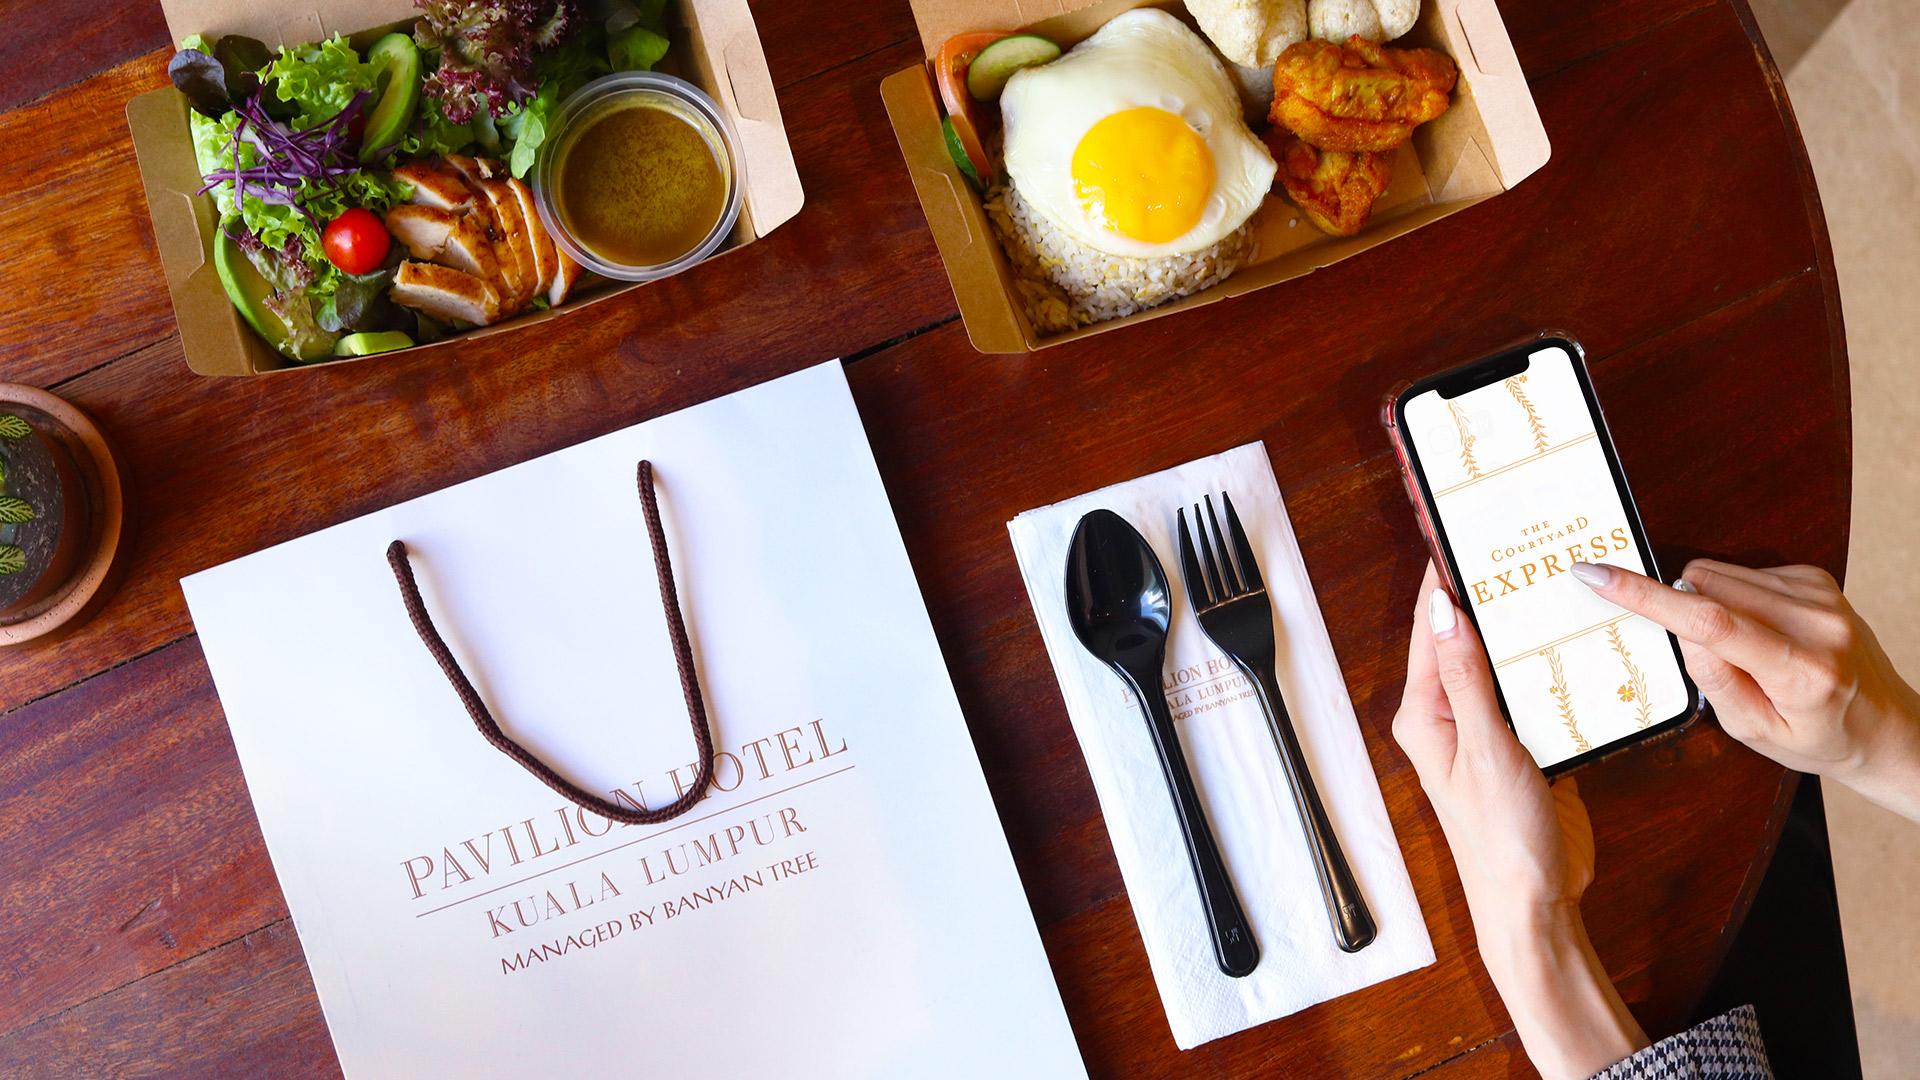 Banyan Tree Malaysia Pavilion Hotel Dining - Pavilion Hotel Take Away And Delivery Lifestyle Shot